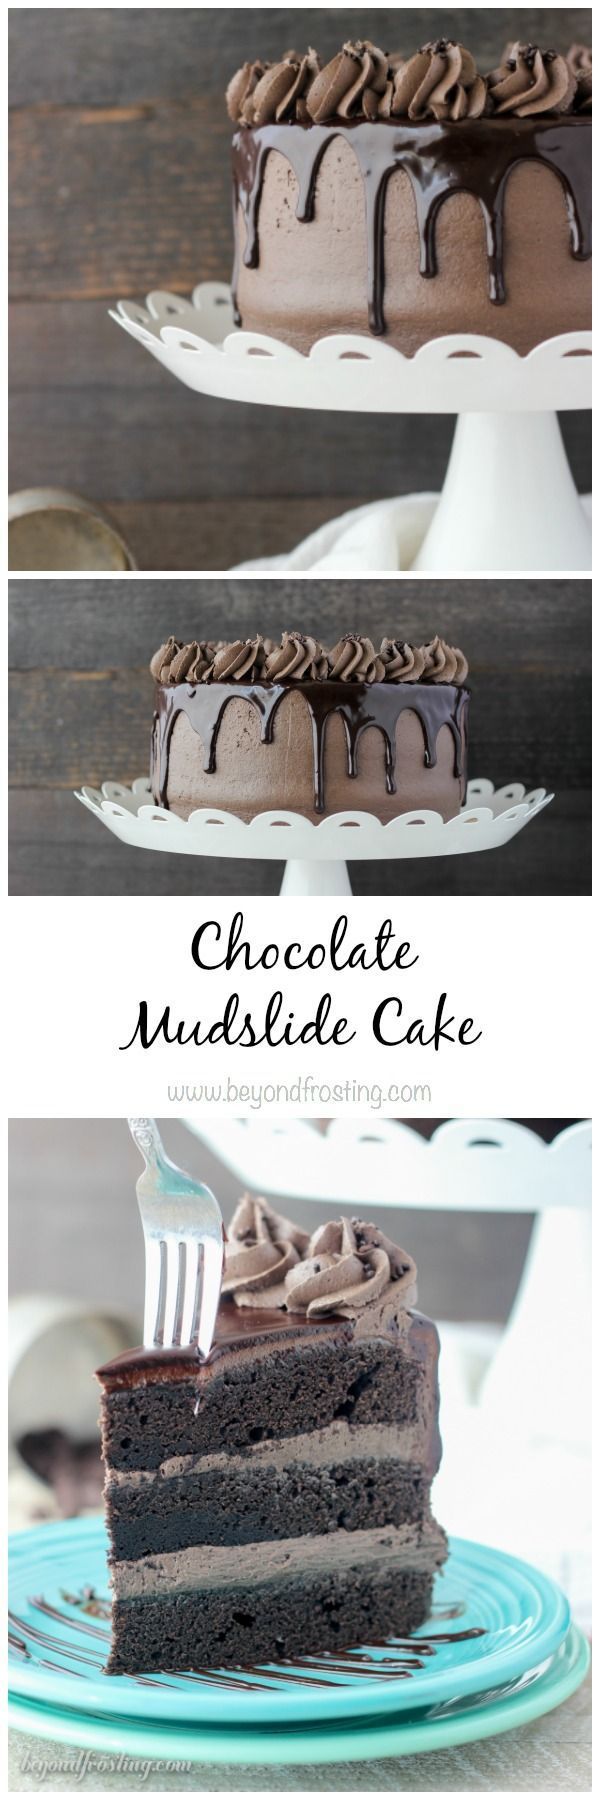 This Chocolate Mudslide Cake is loaded with chocolate, Kahlua and Bailey’s Irish Cream. The decadent cho